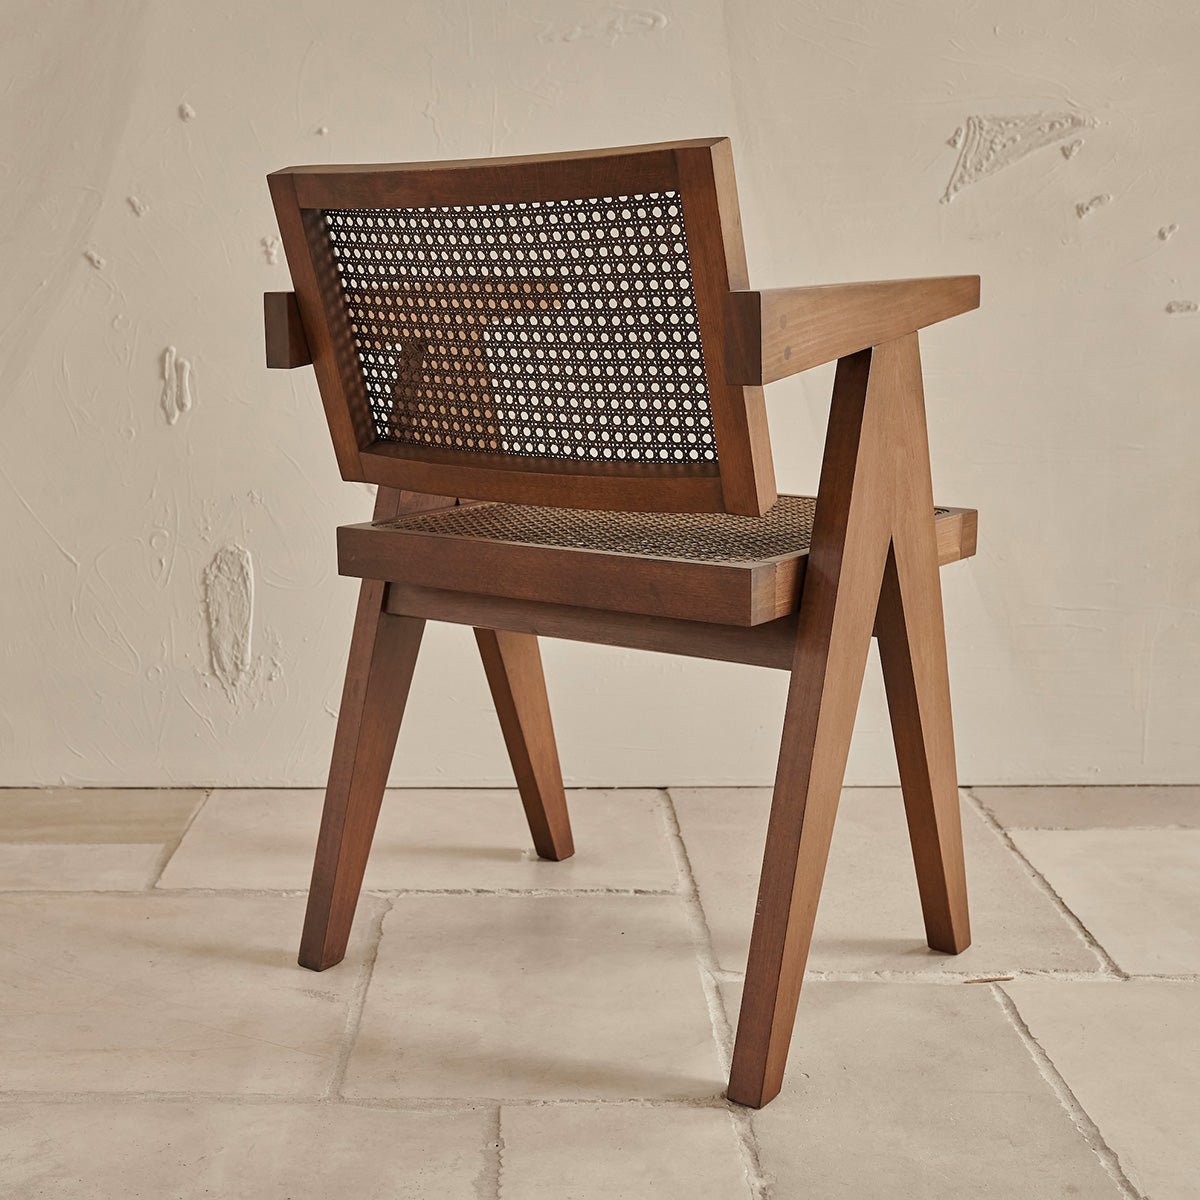 Pierre Jeanneret Office Chair - EDITED